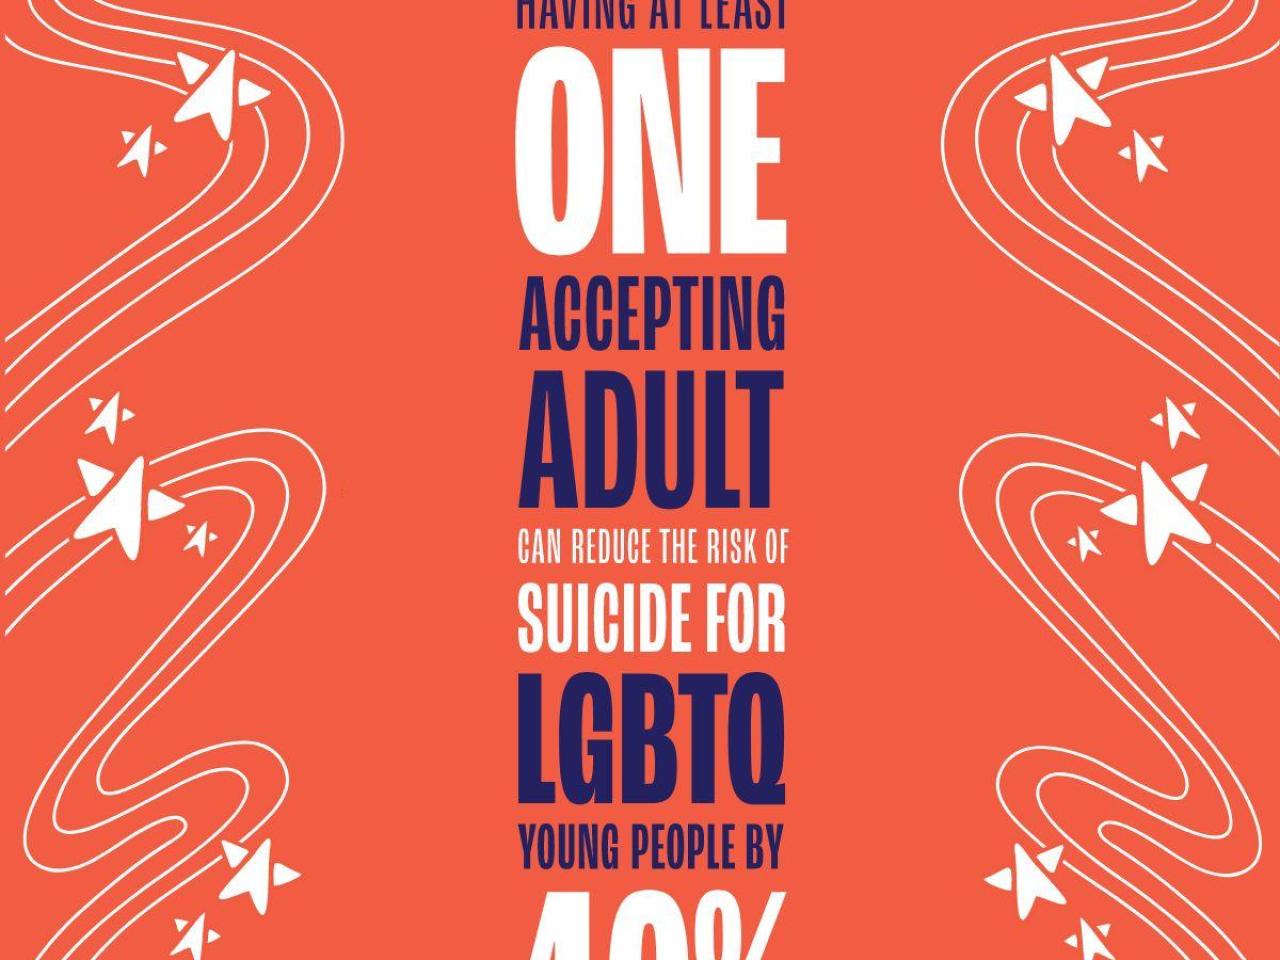 Orange graphic stating "Having at least one accepting adult can reduce the risk of suicide for LGBTQ young people by 40%"